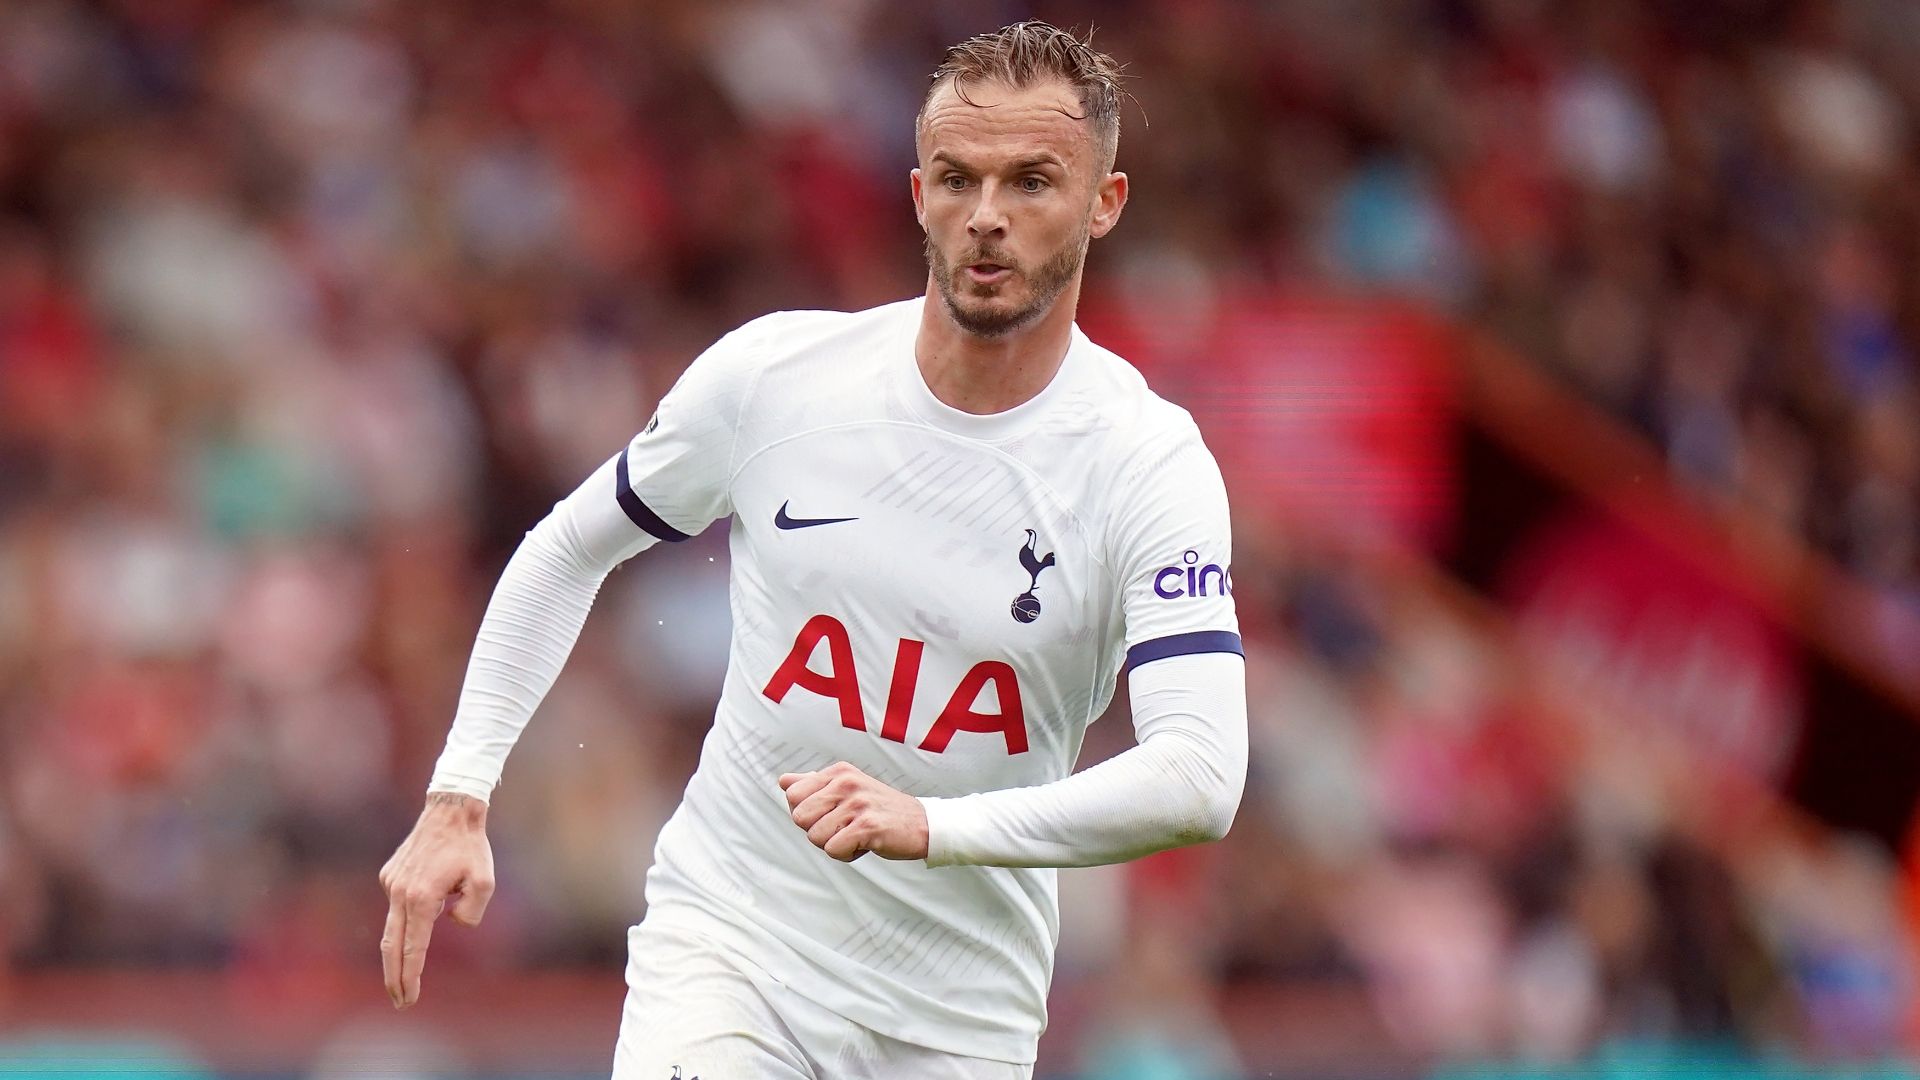 Maddison has been the key man for Spurs this season